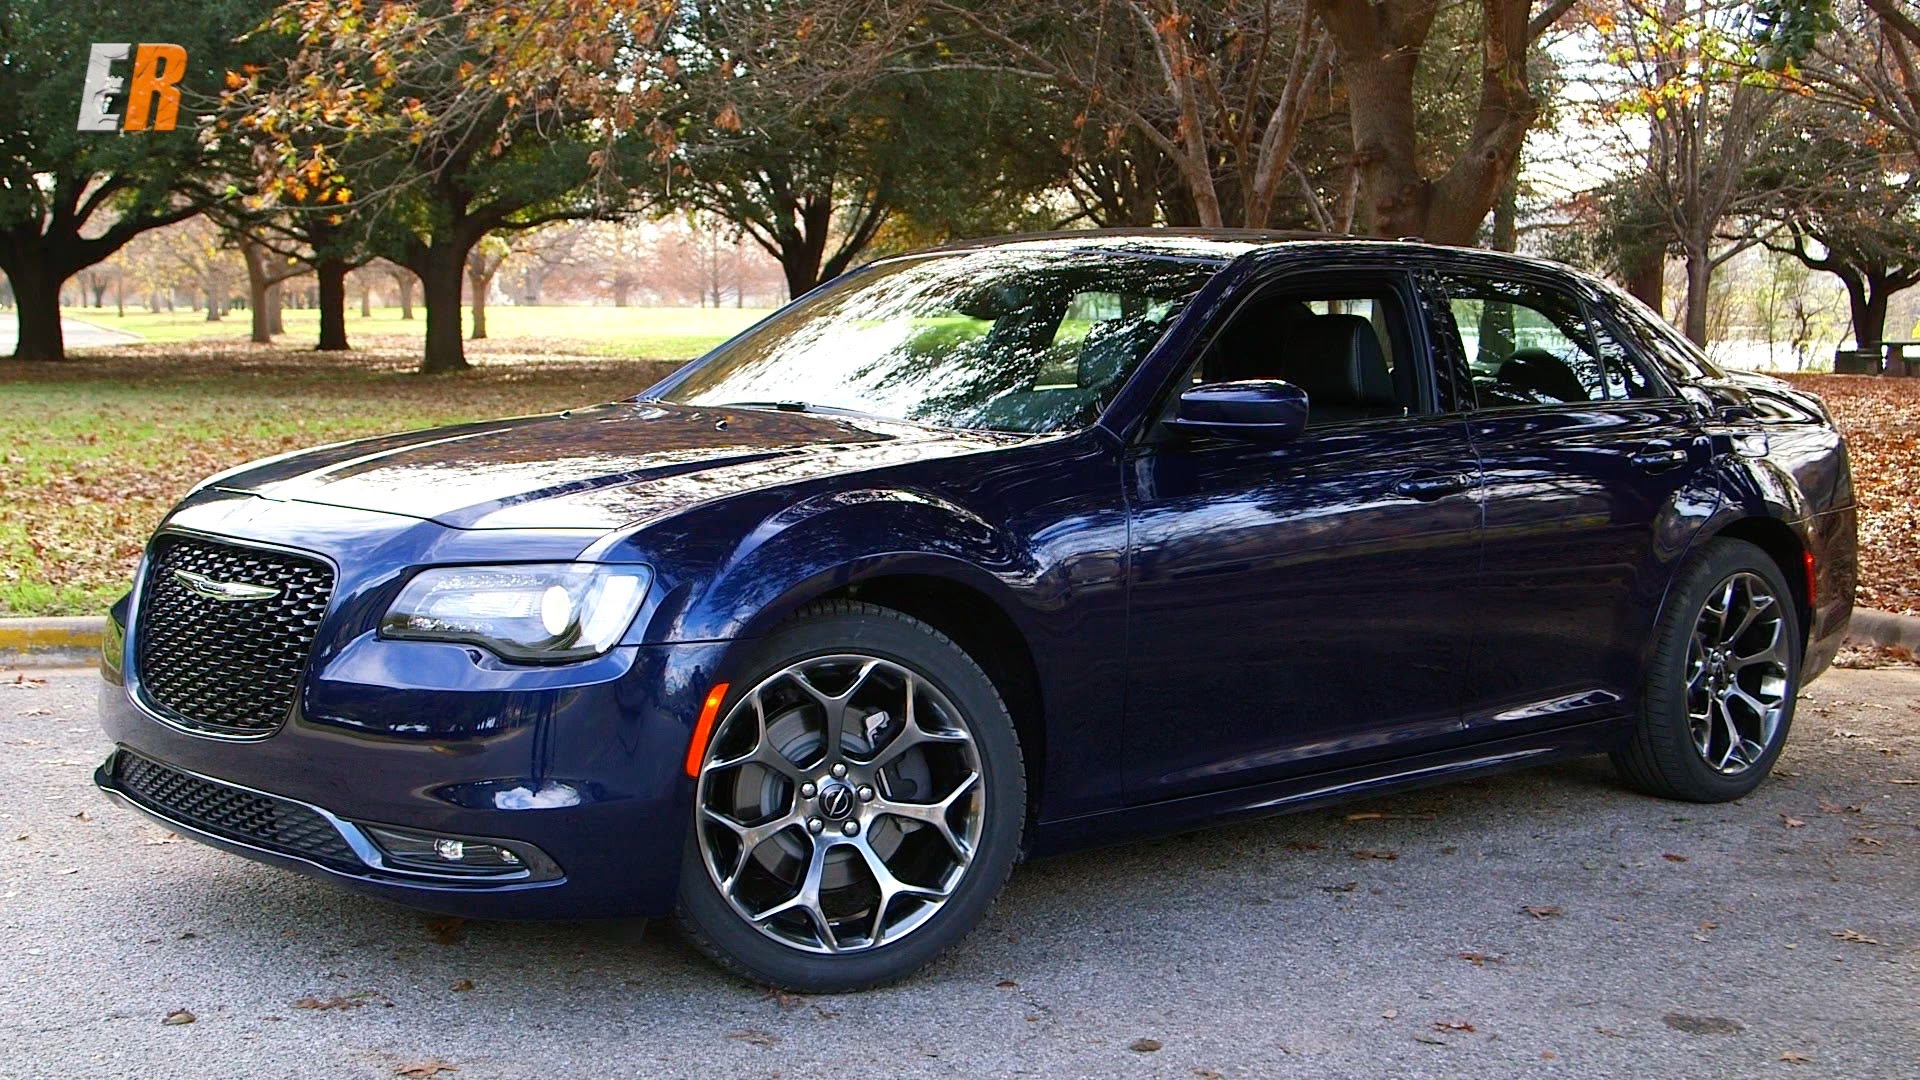 2015 Chrysler 300 HD Picture Wallpapers